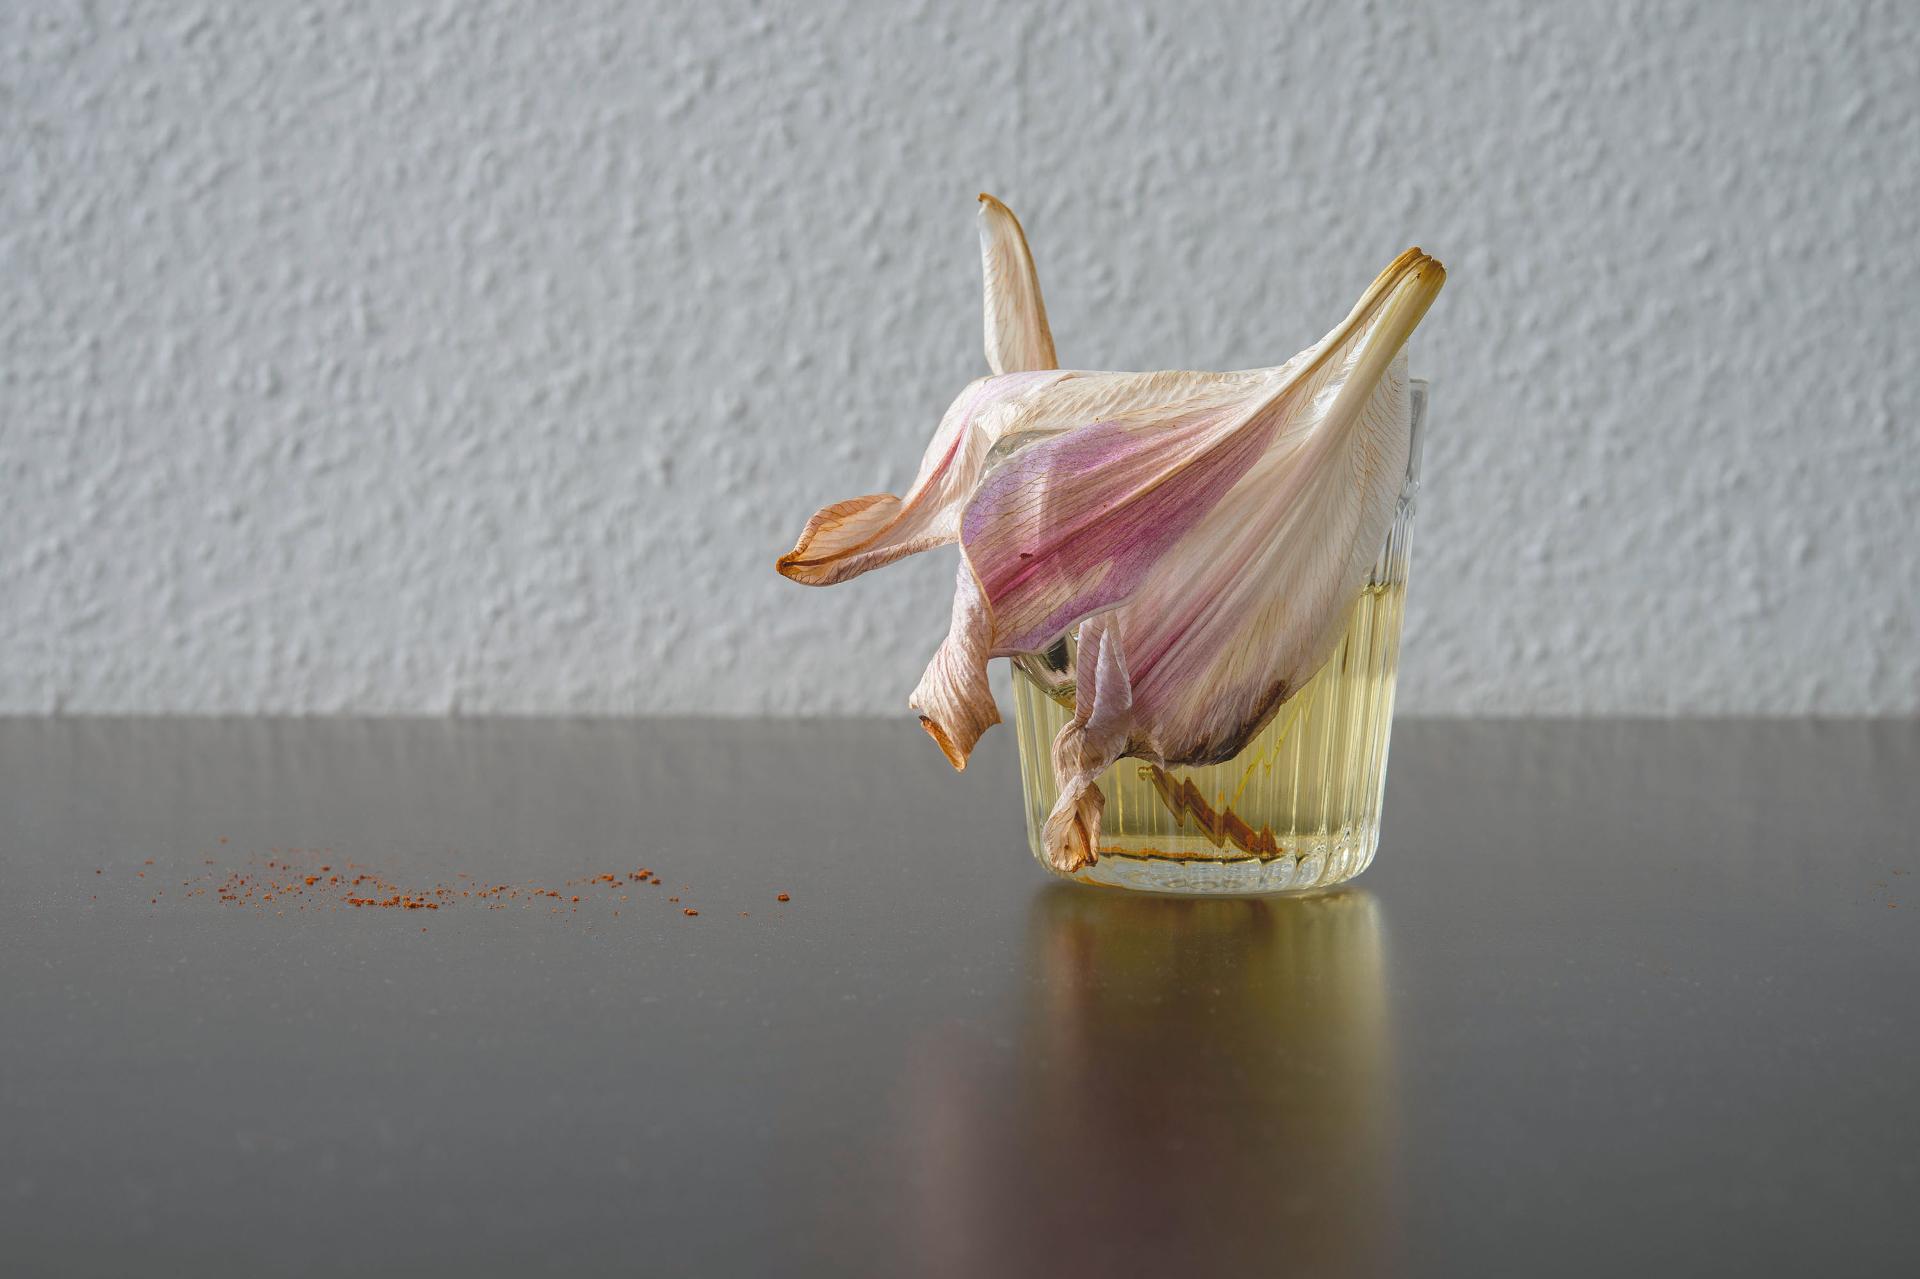 Chih-Chien Wang - Lili Fell in a Glass, 2021